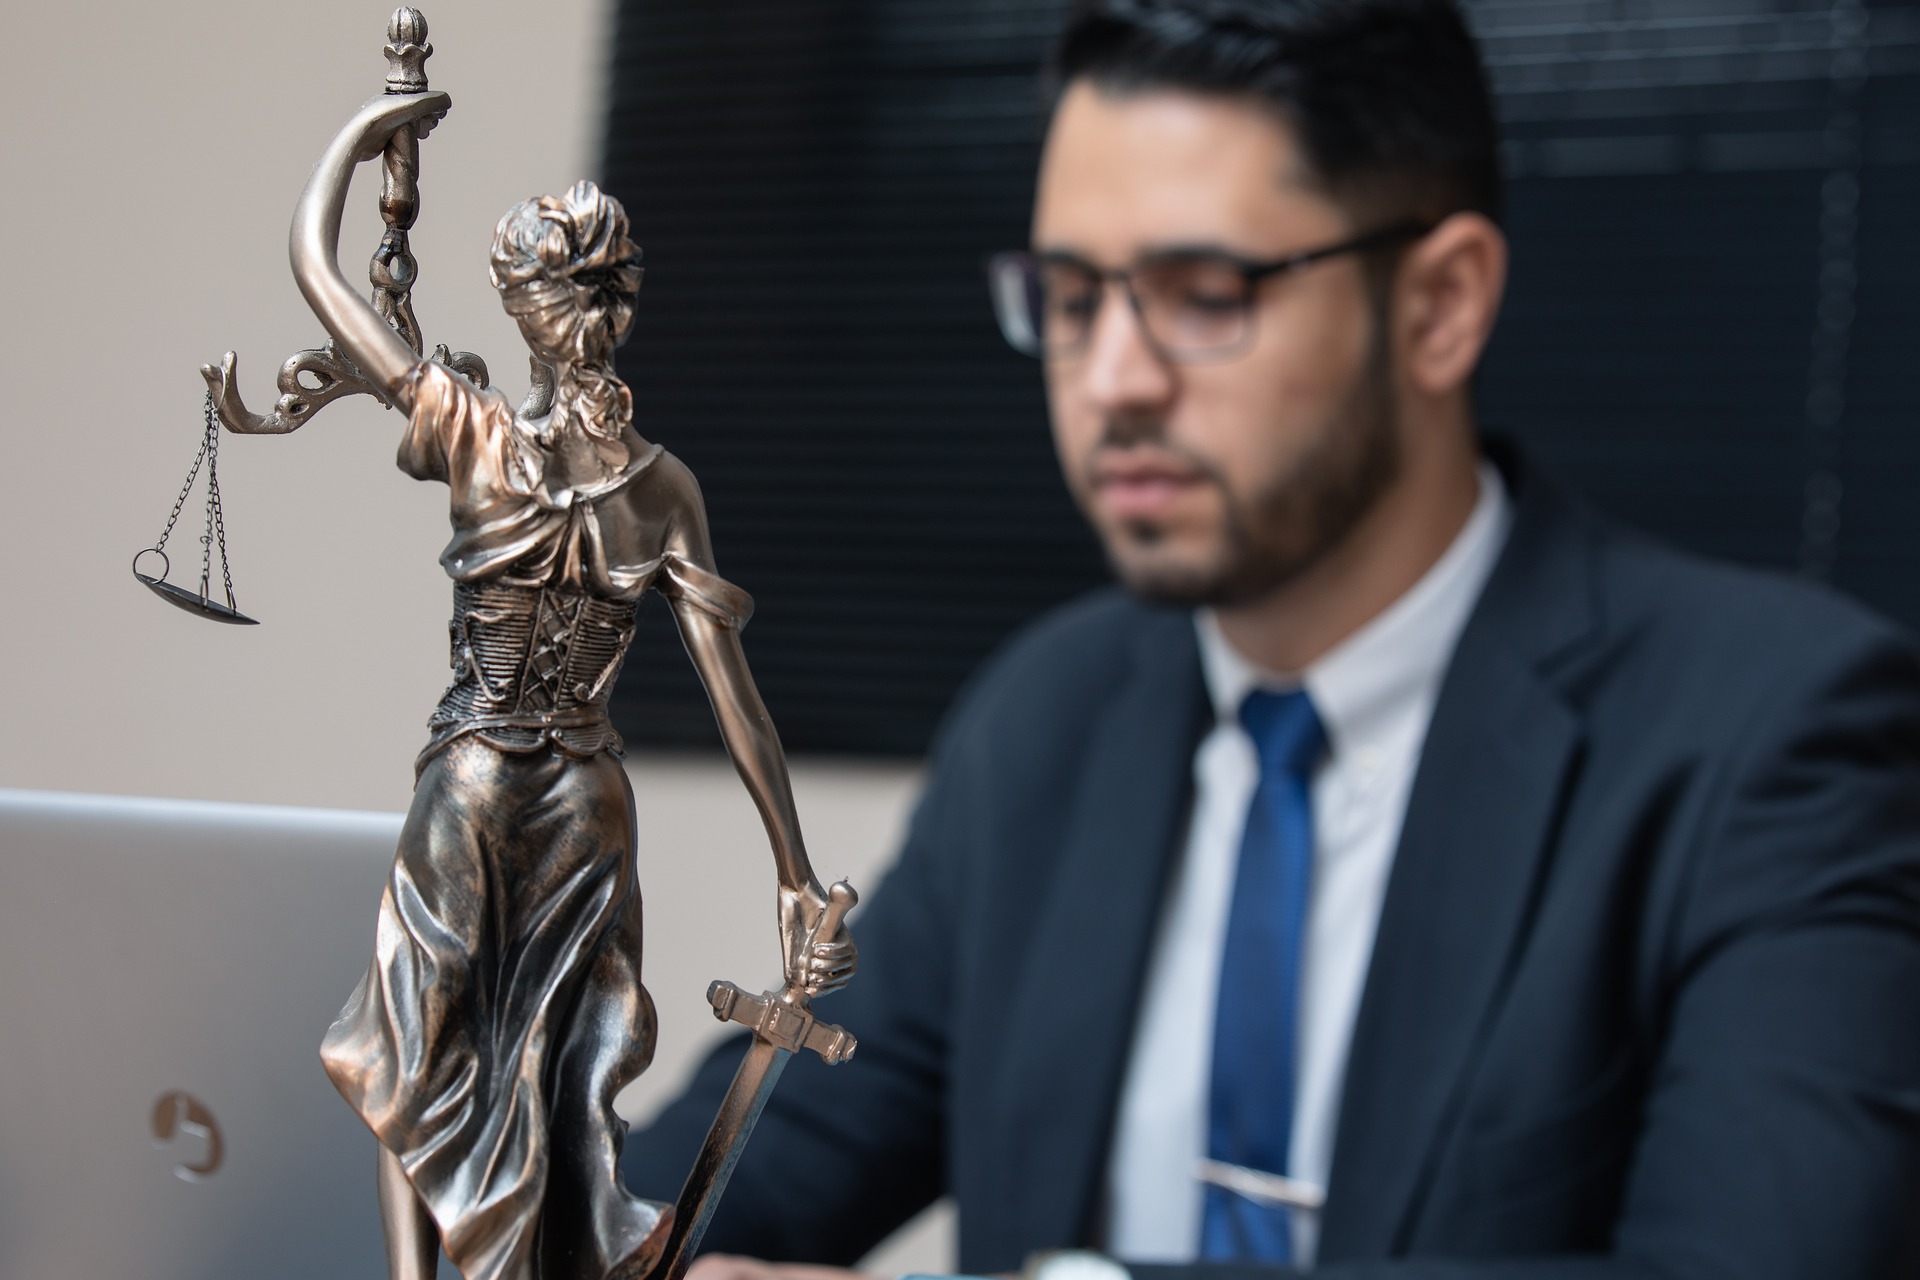 What to Look for When Recruiting Legal Professionals